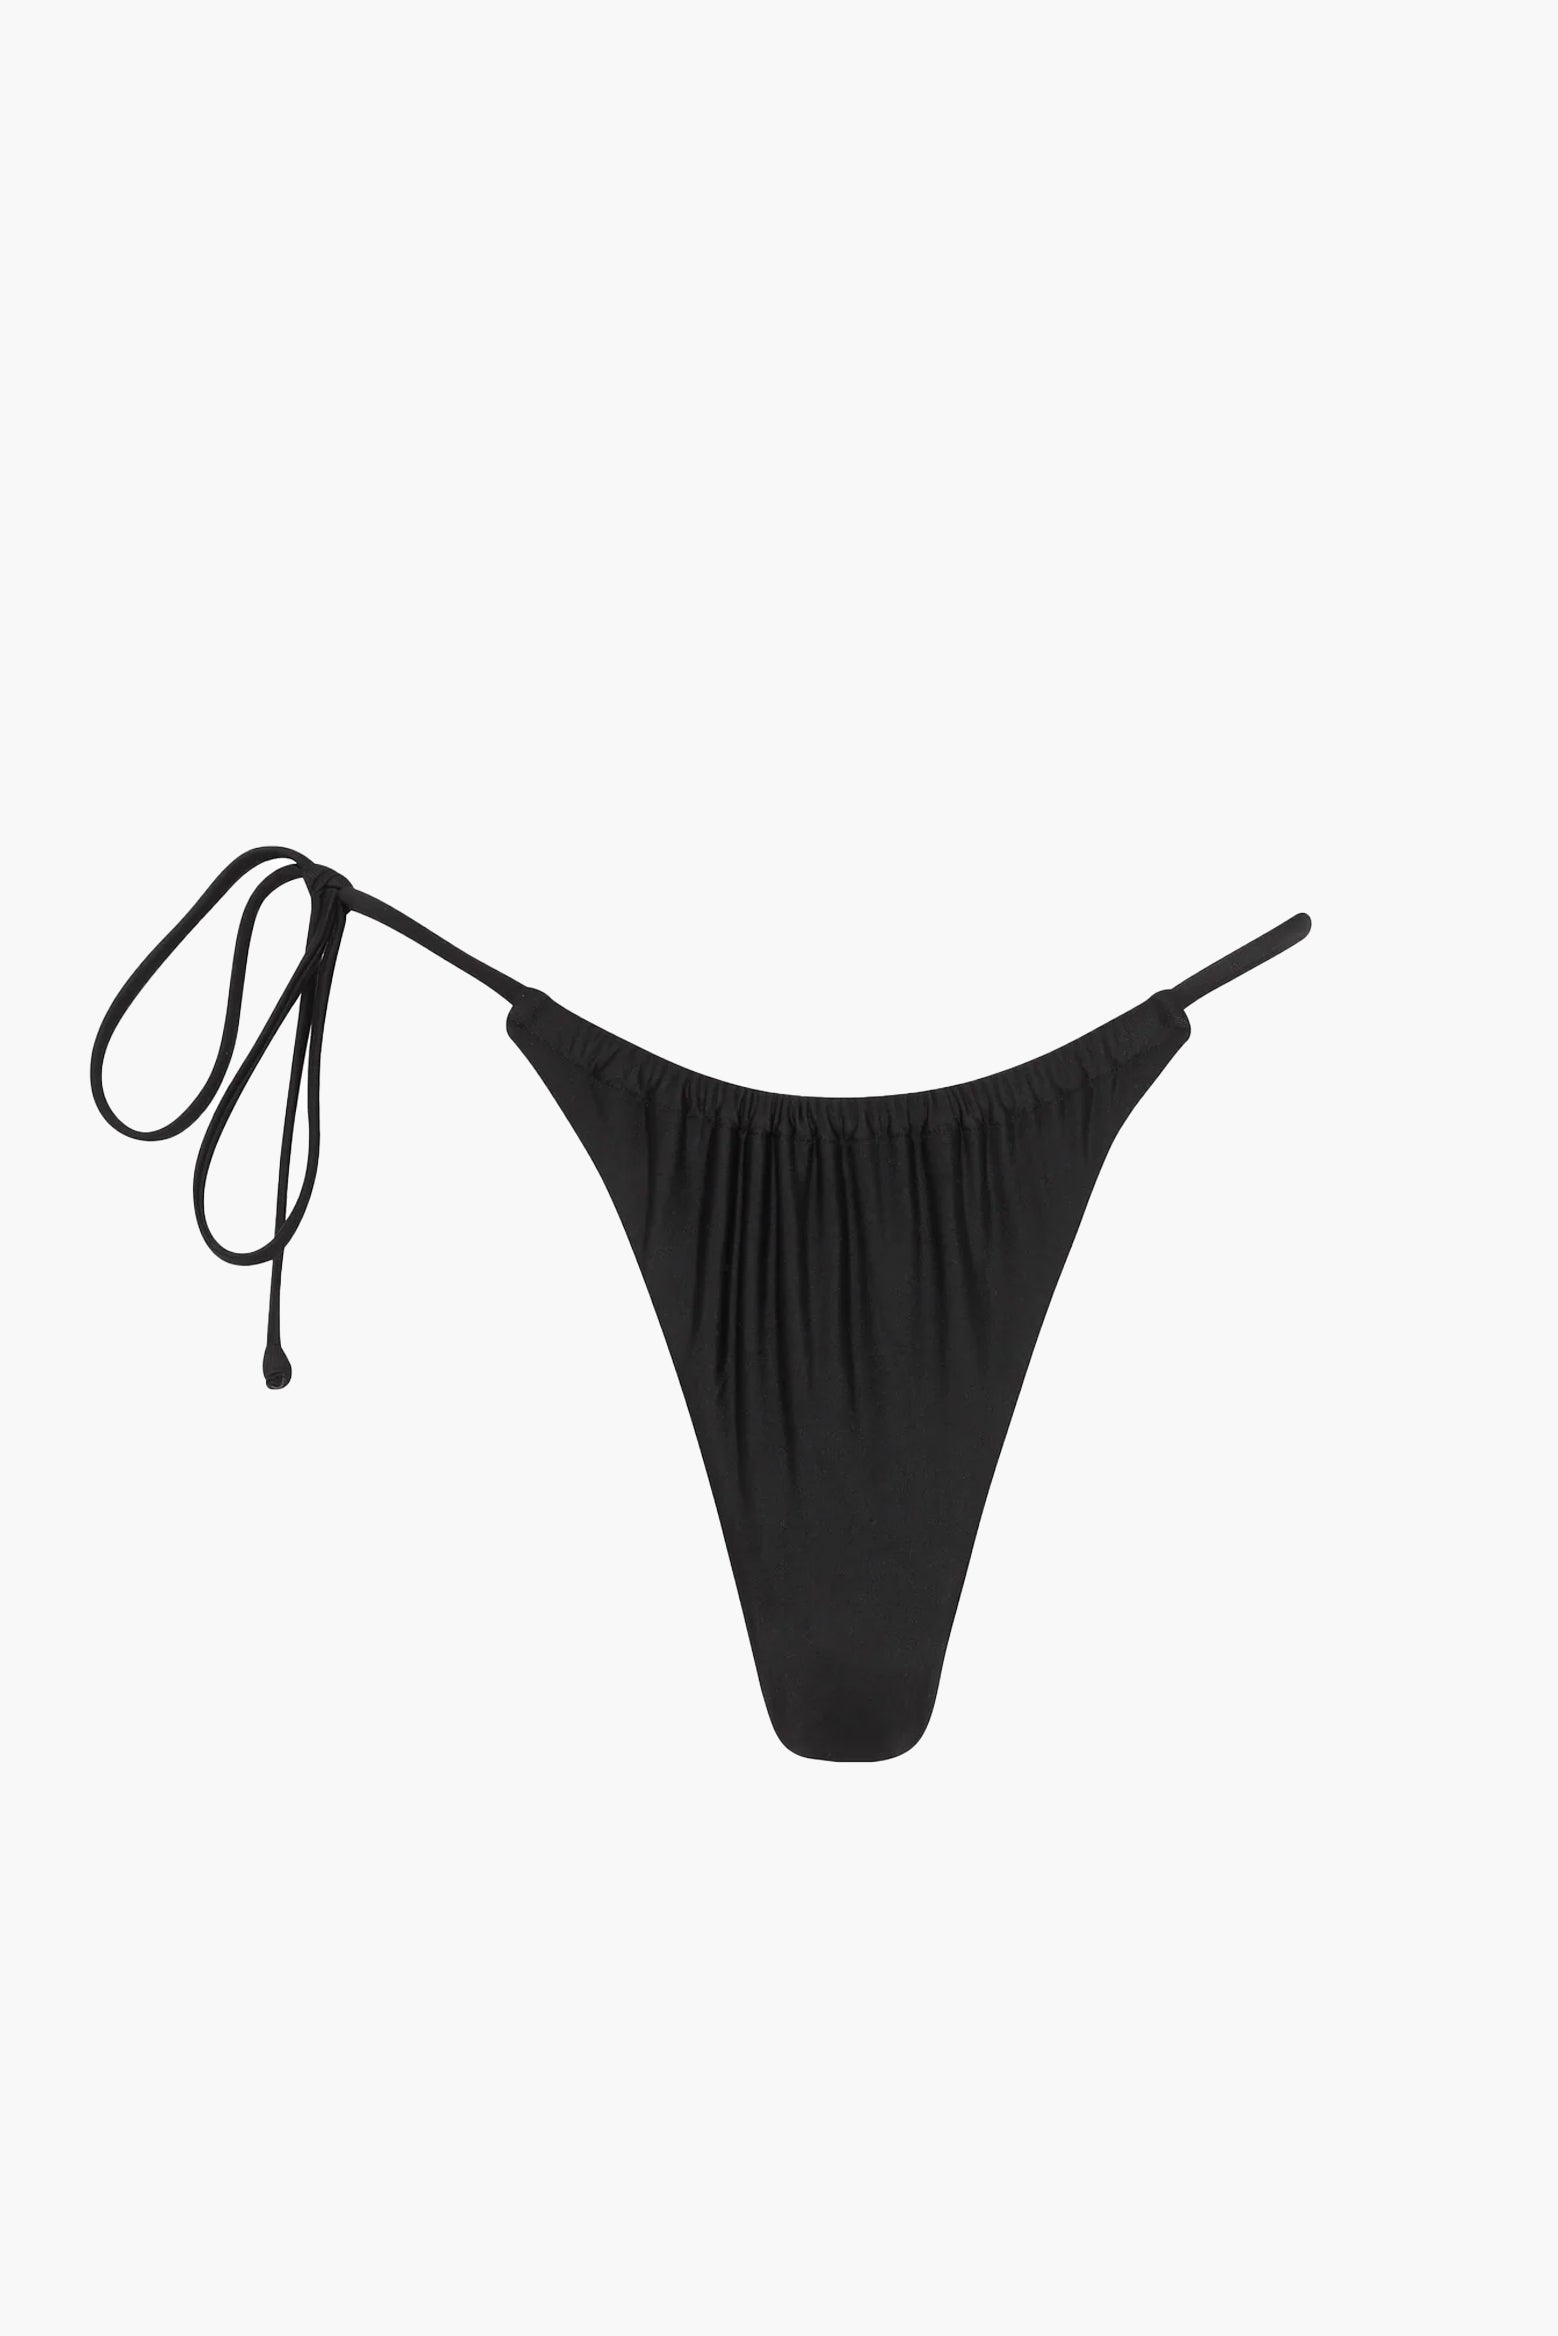 SIR Hendry String Bikini Bottoms in Black available at The New Trend Australia.